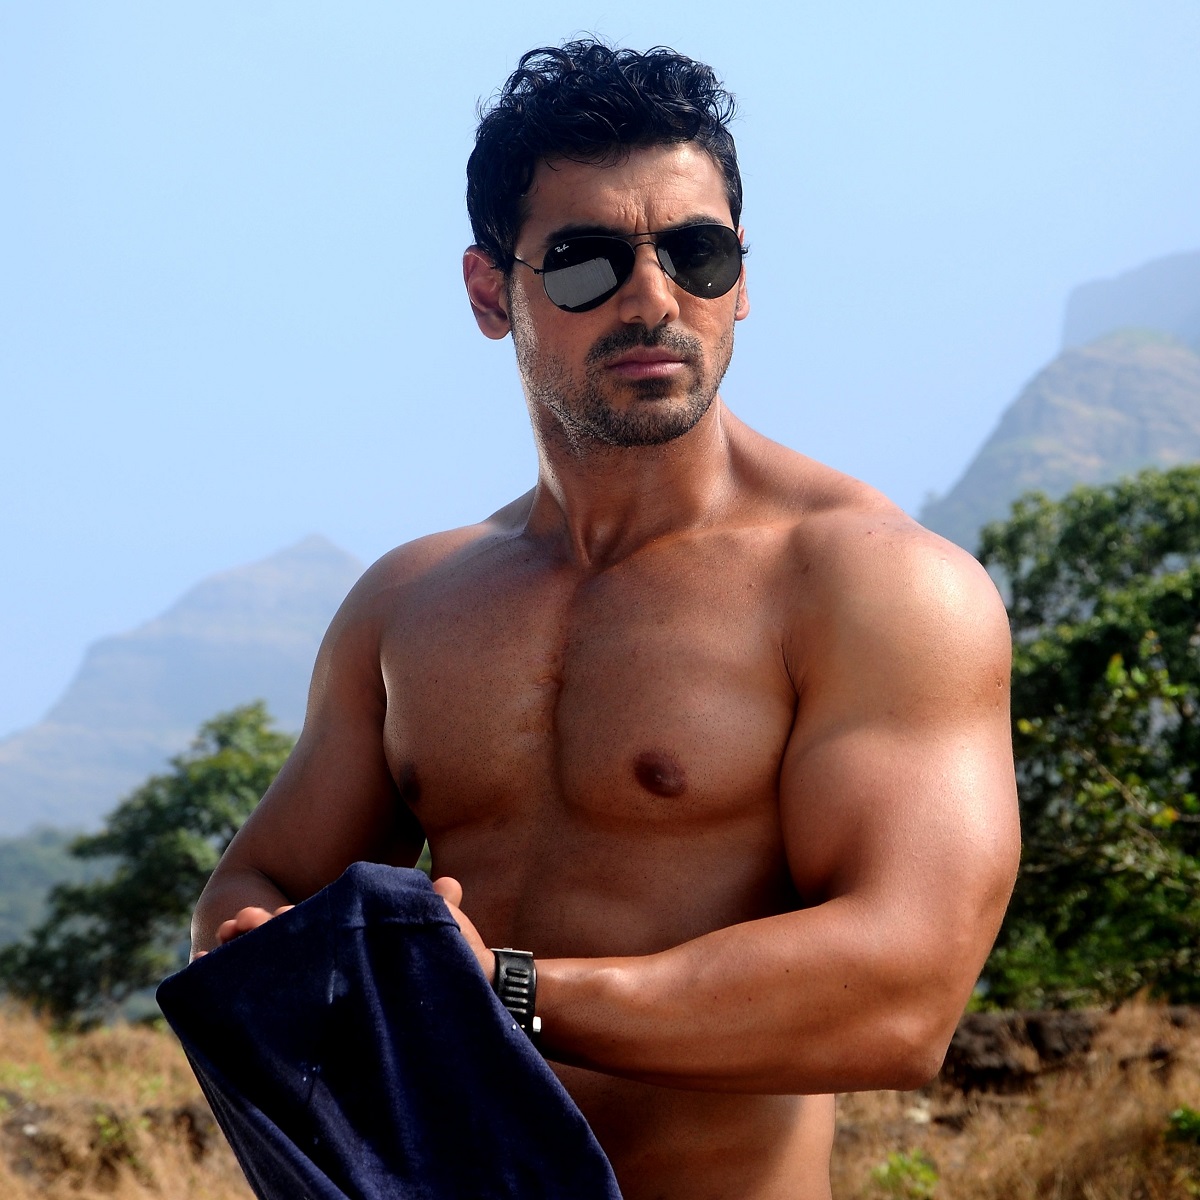 EXCLUSIVE: John Abraham gets Force rights from Vipul Shah; Gearing up to make Force 3 soon